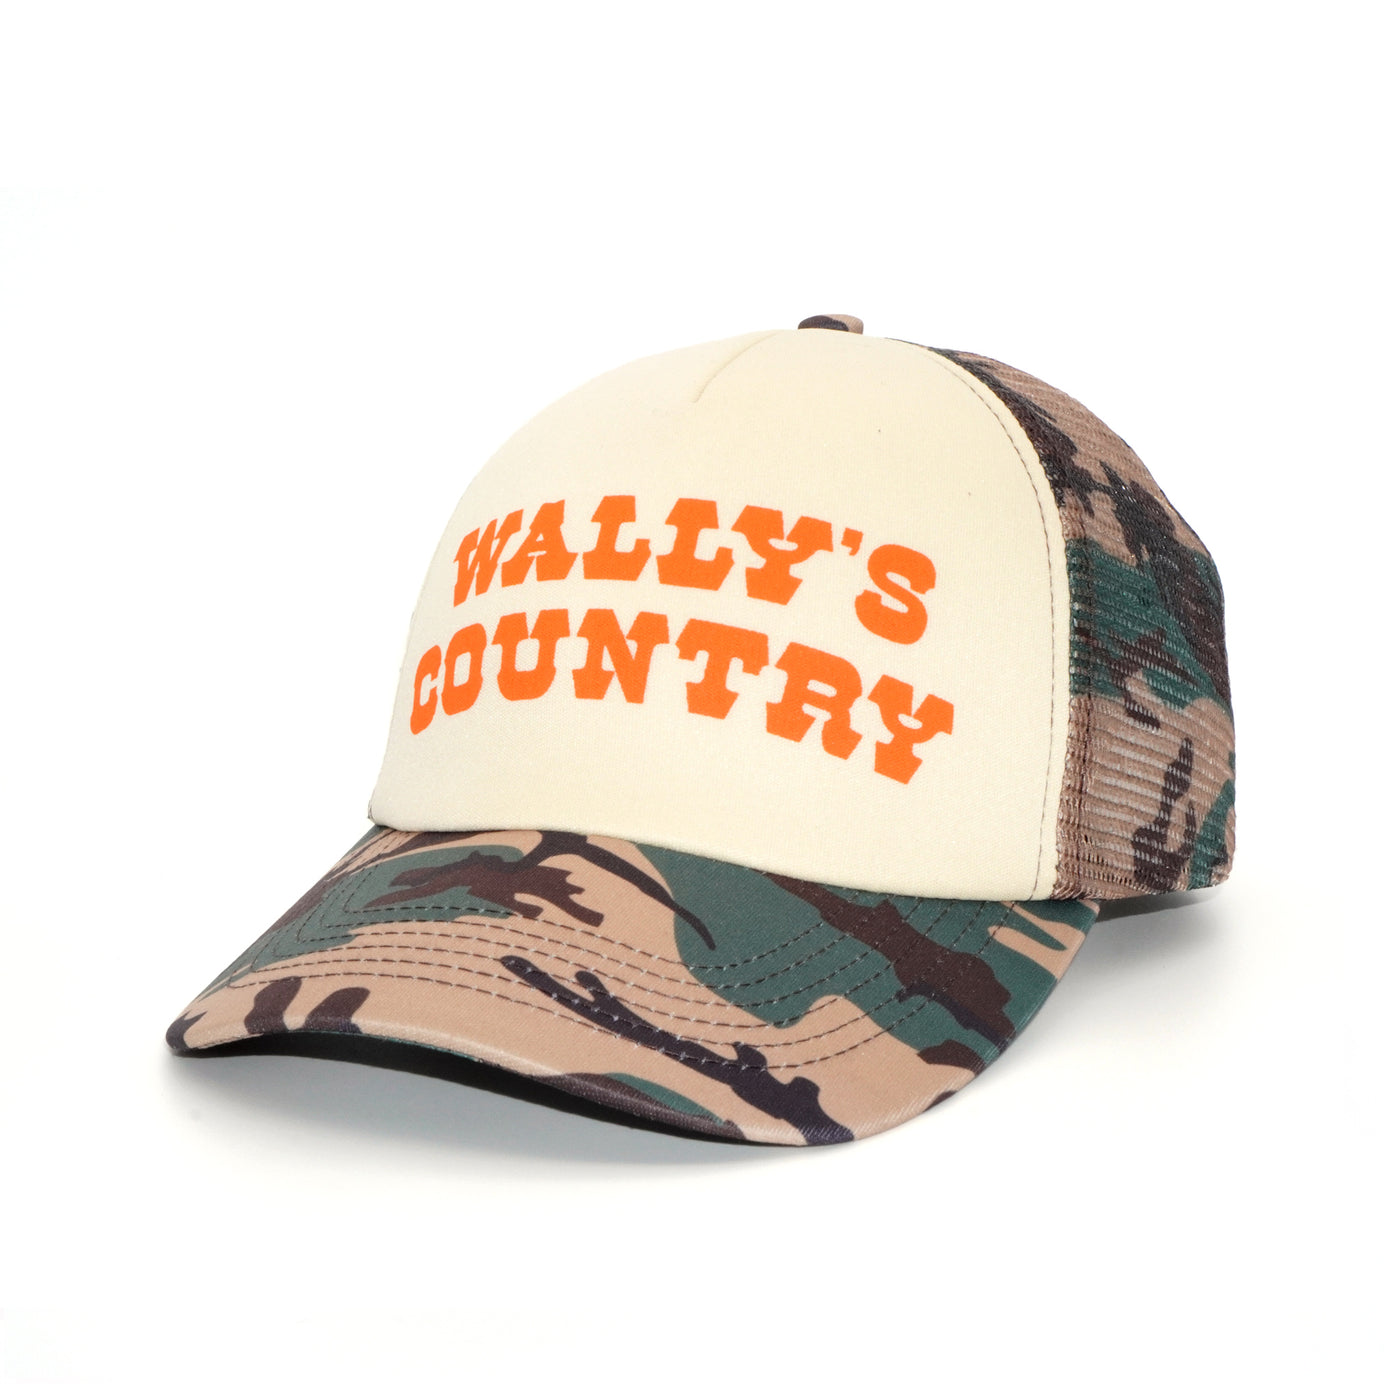 Camo Country Tan/WDL Trucker Hat